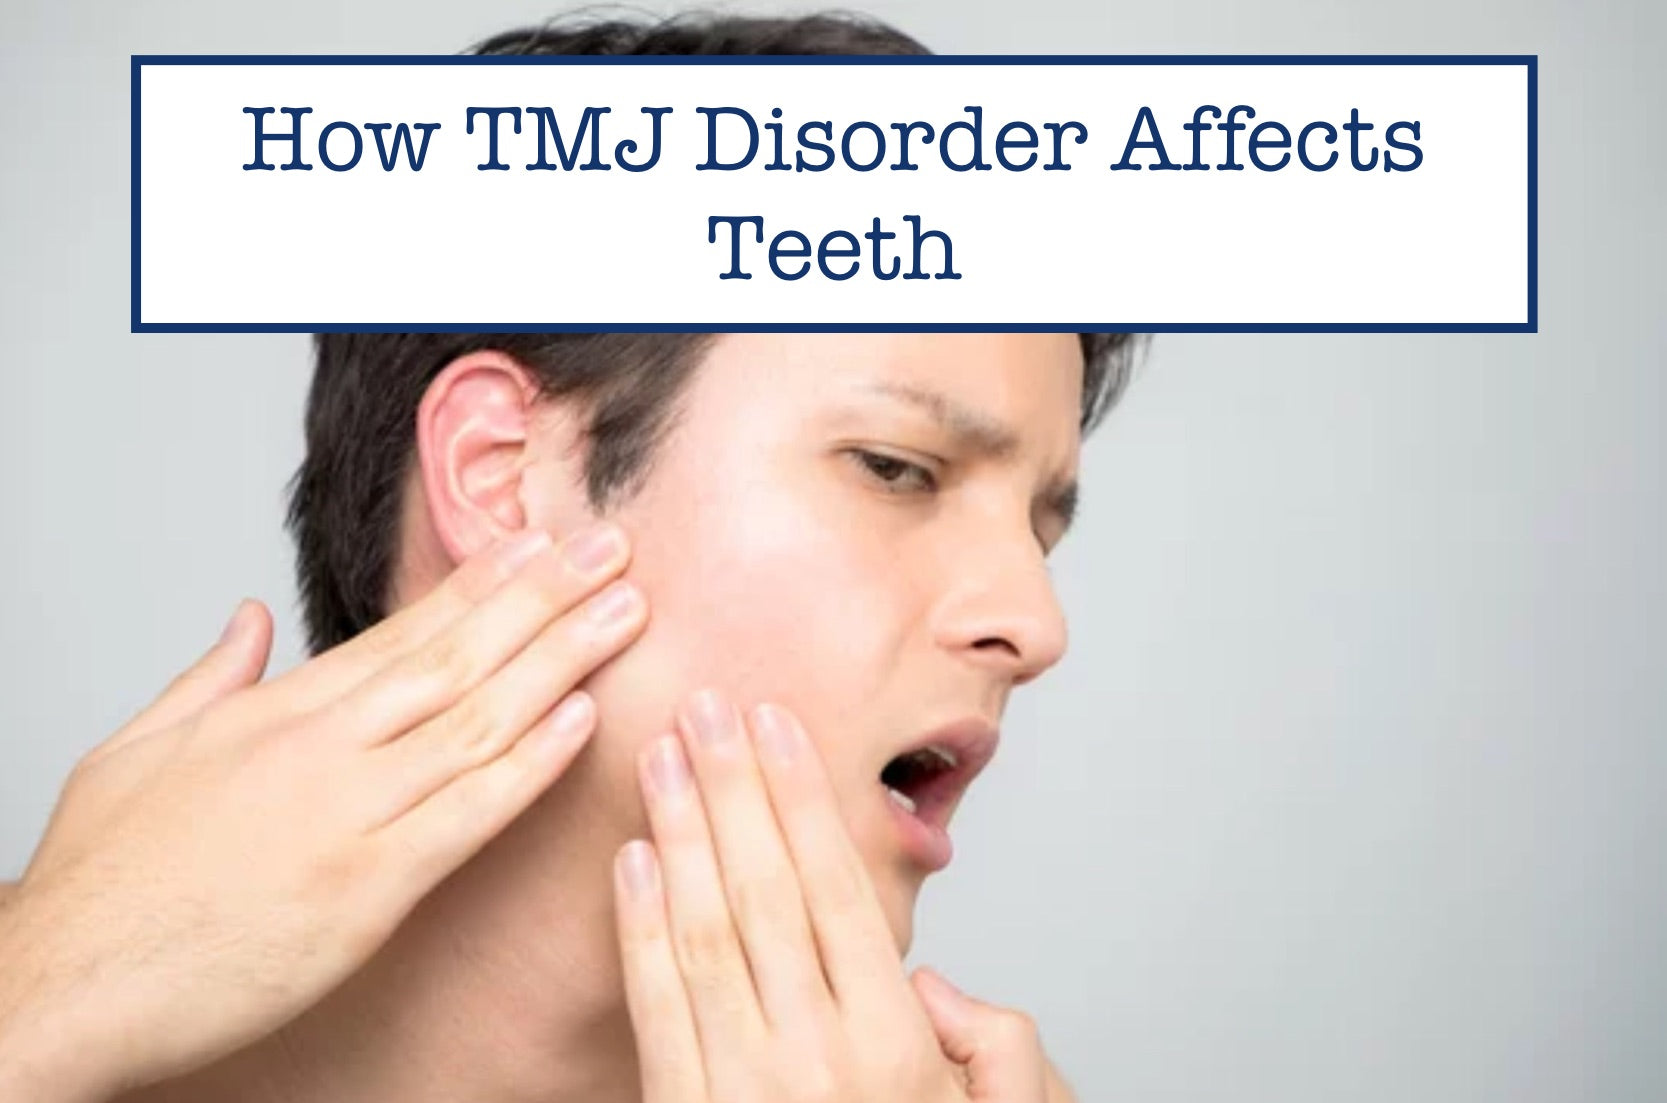 How TMJ Disorder Affects Teeth